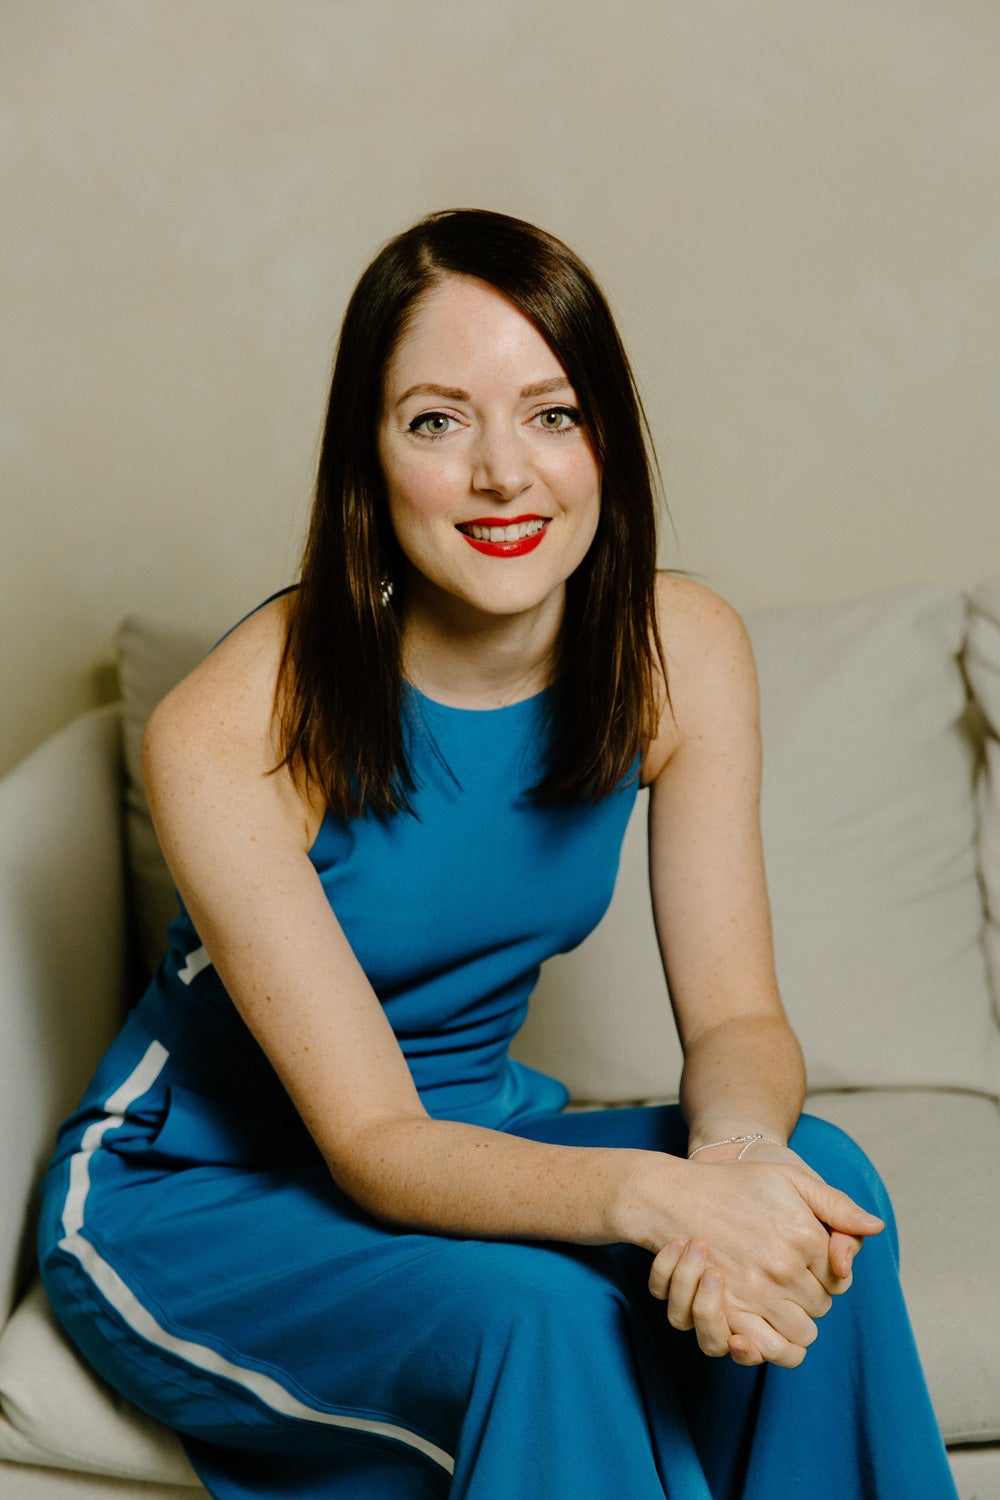 Laura Price wears a blue jumpsuit, sitting on a cream sofa and smiling to camera